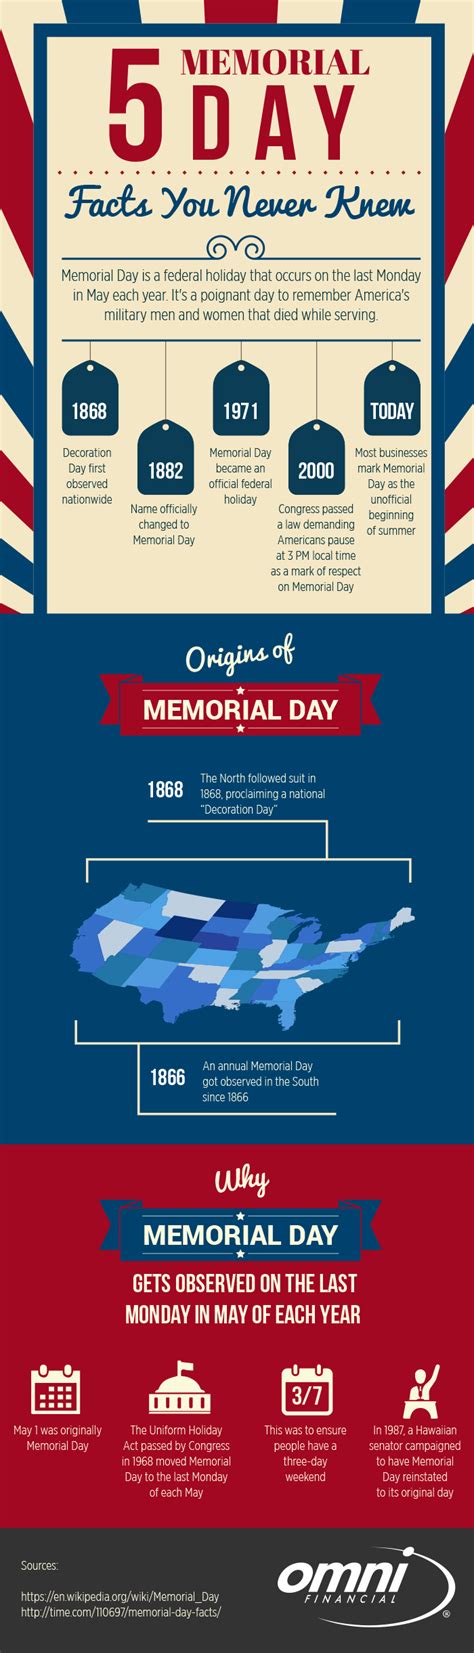 Printable Memorial Day Facts